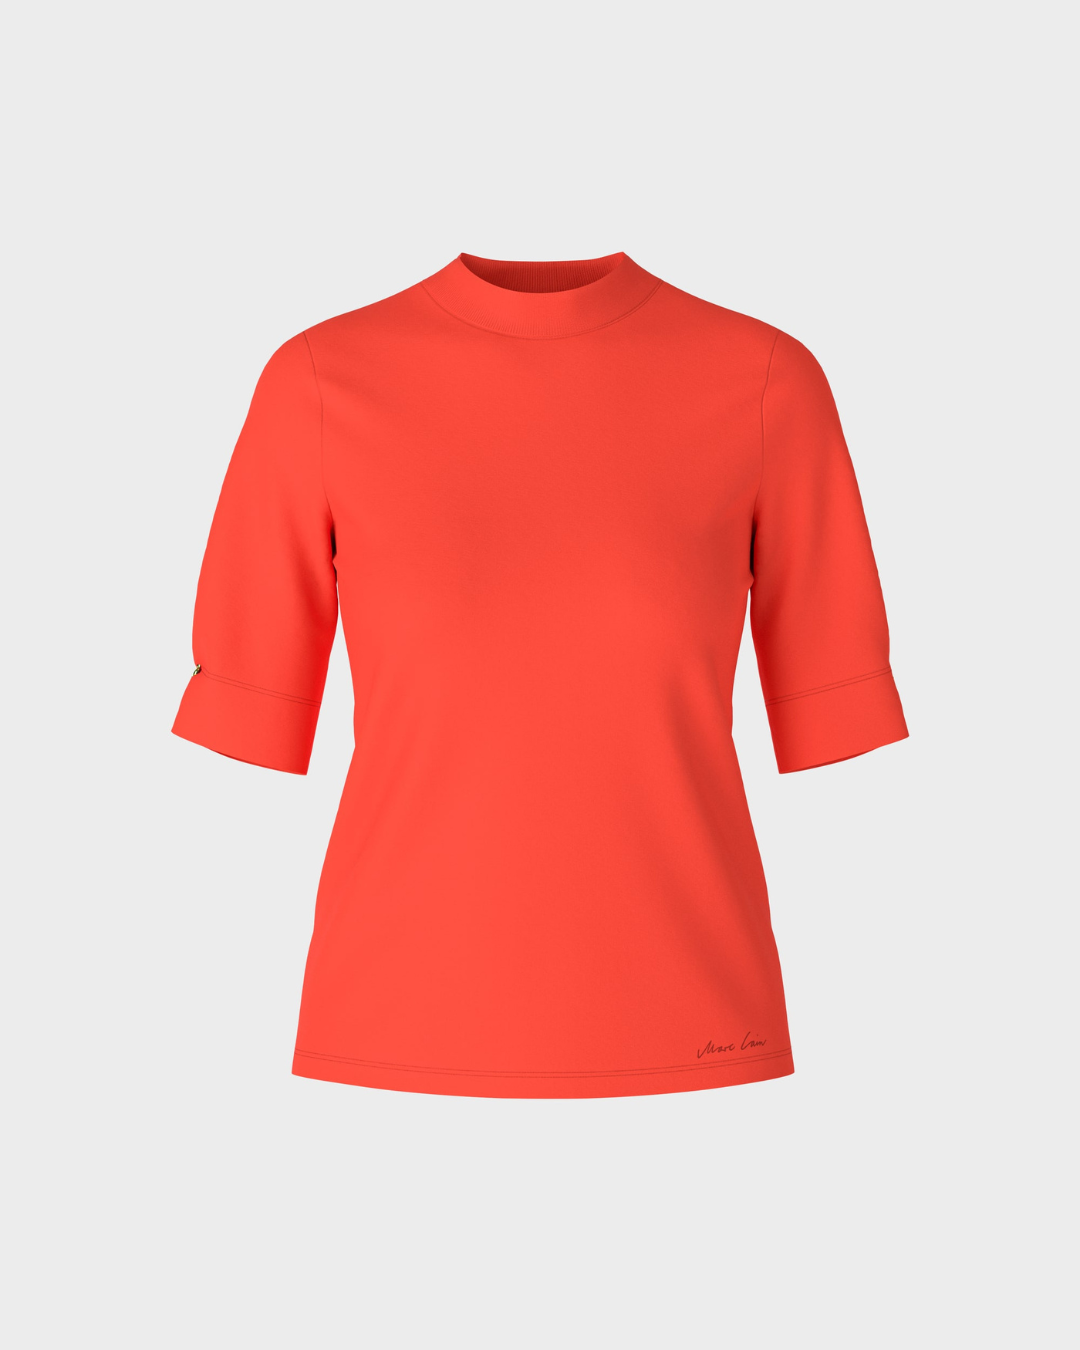 T-shirt with half-length sleeves